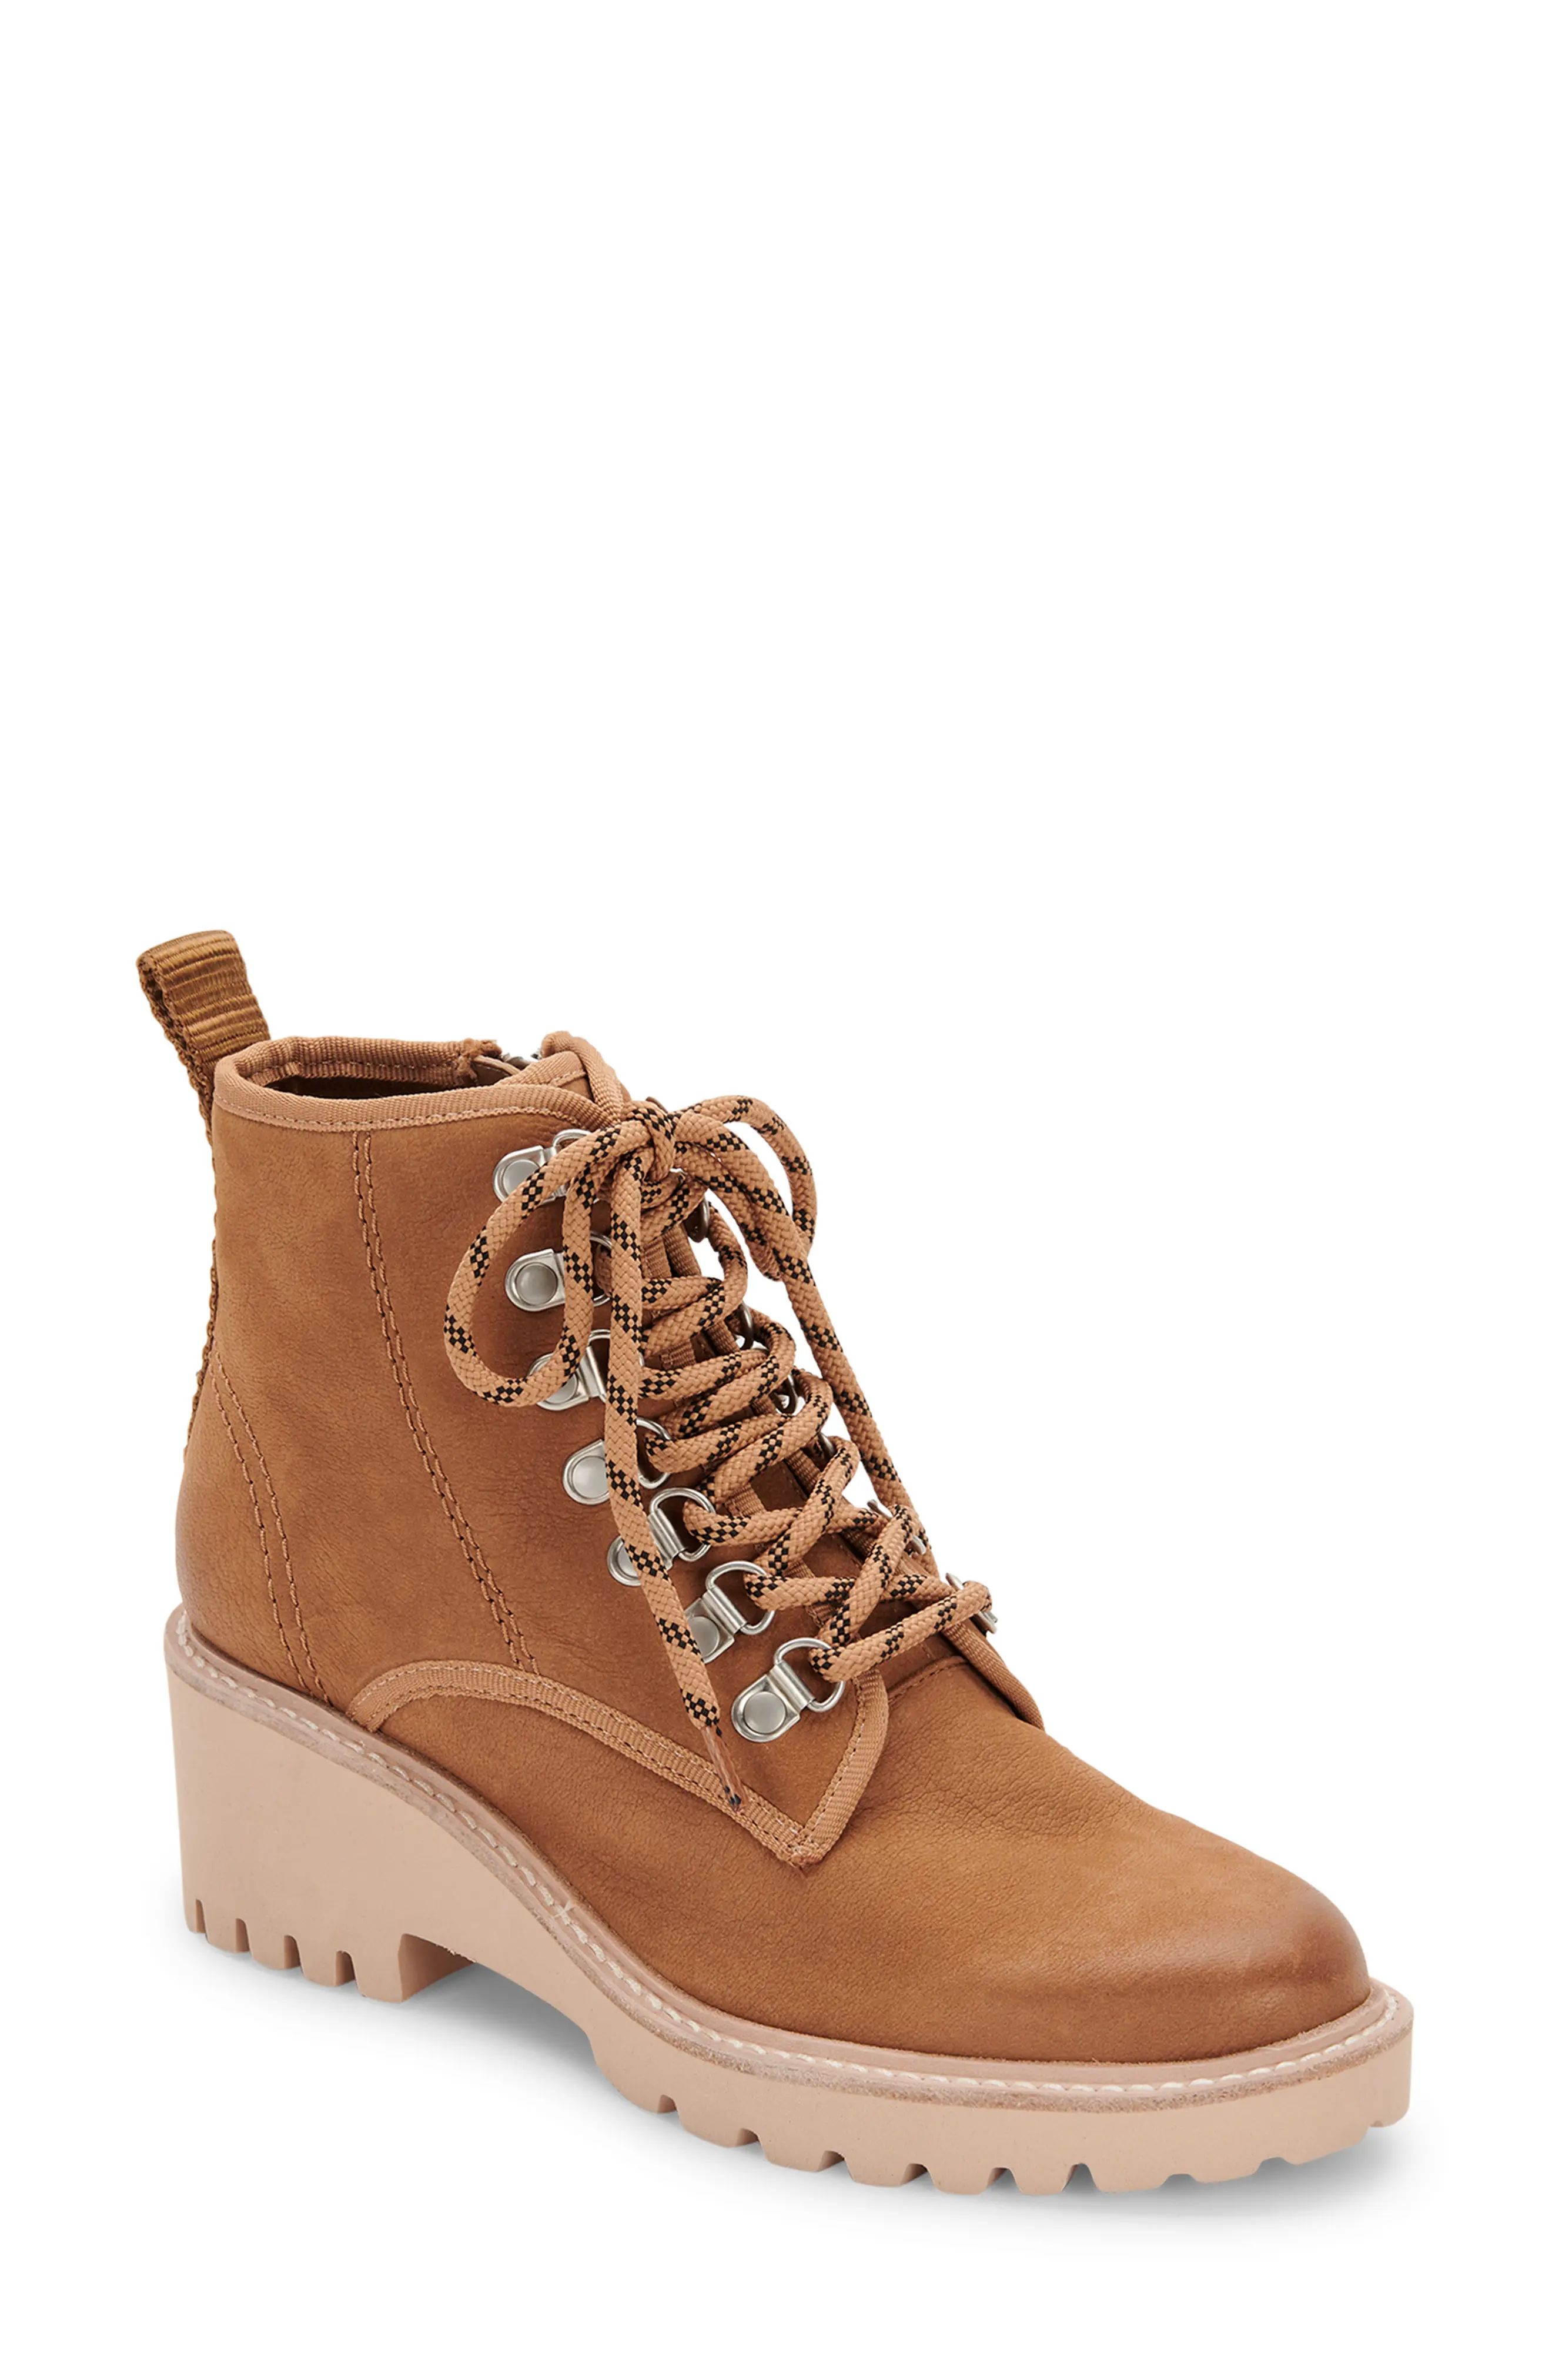 Dolce Vita Huey Hiker Boot in Whiskey Nubuck at Nordstrom, Size 6.5 | Nordstrom